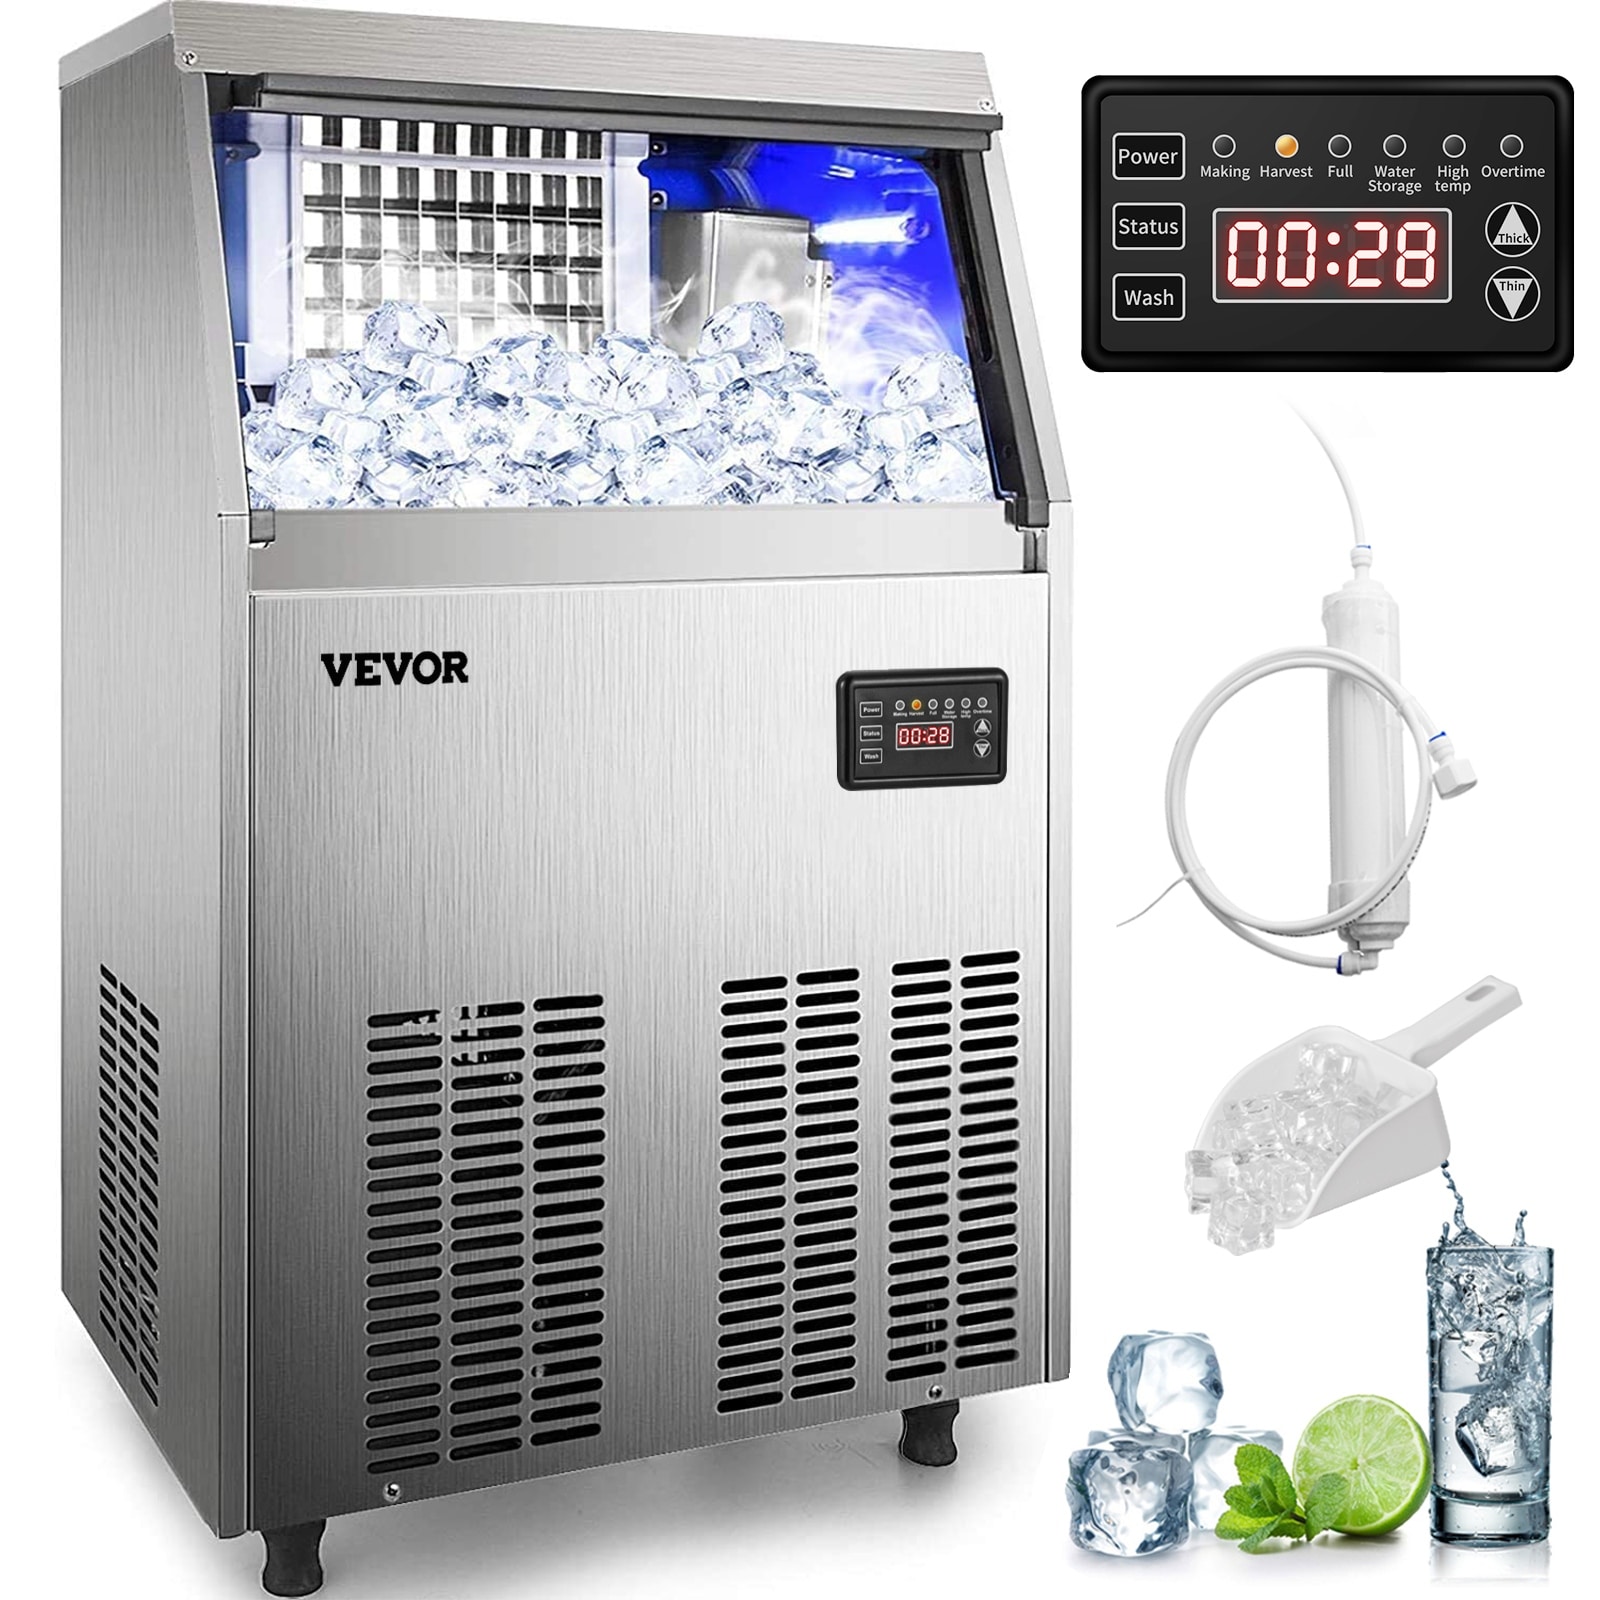 https://ak1.ostkcdn.com/images/products/is/images/direct/900b01fe63671e4ab37b22d866a5b5a5162c9918/VEVOR-Commercial-Ice-Maker-Machine-with-33LBS-Bin-Stainless-Steel-Automatic-Operation.jpg